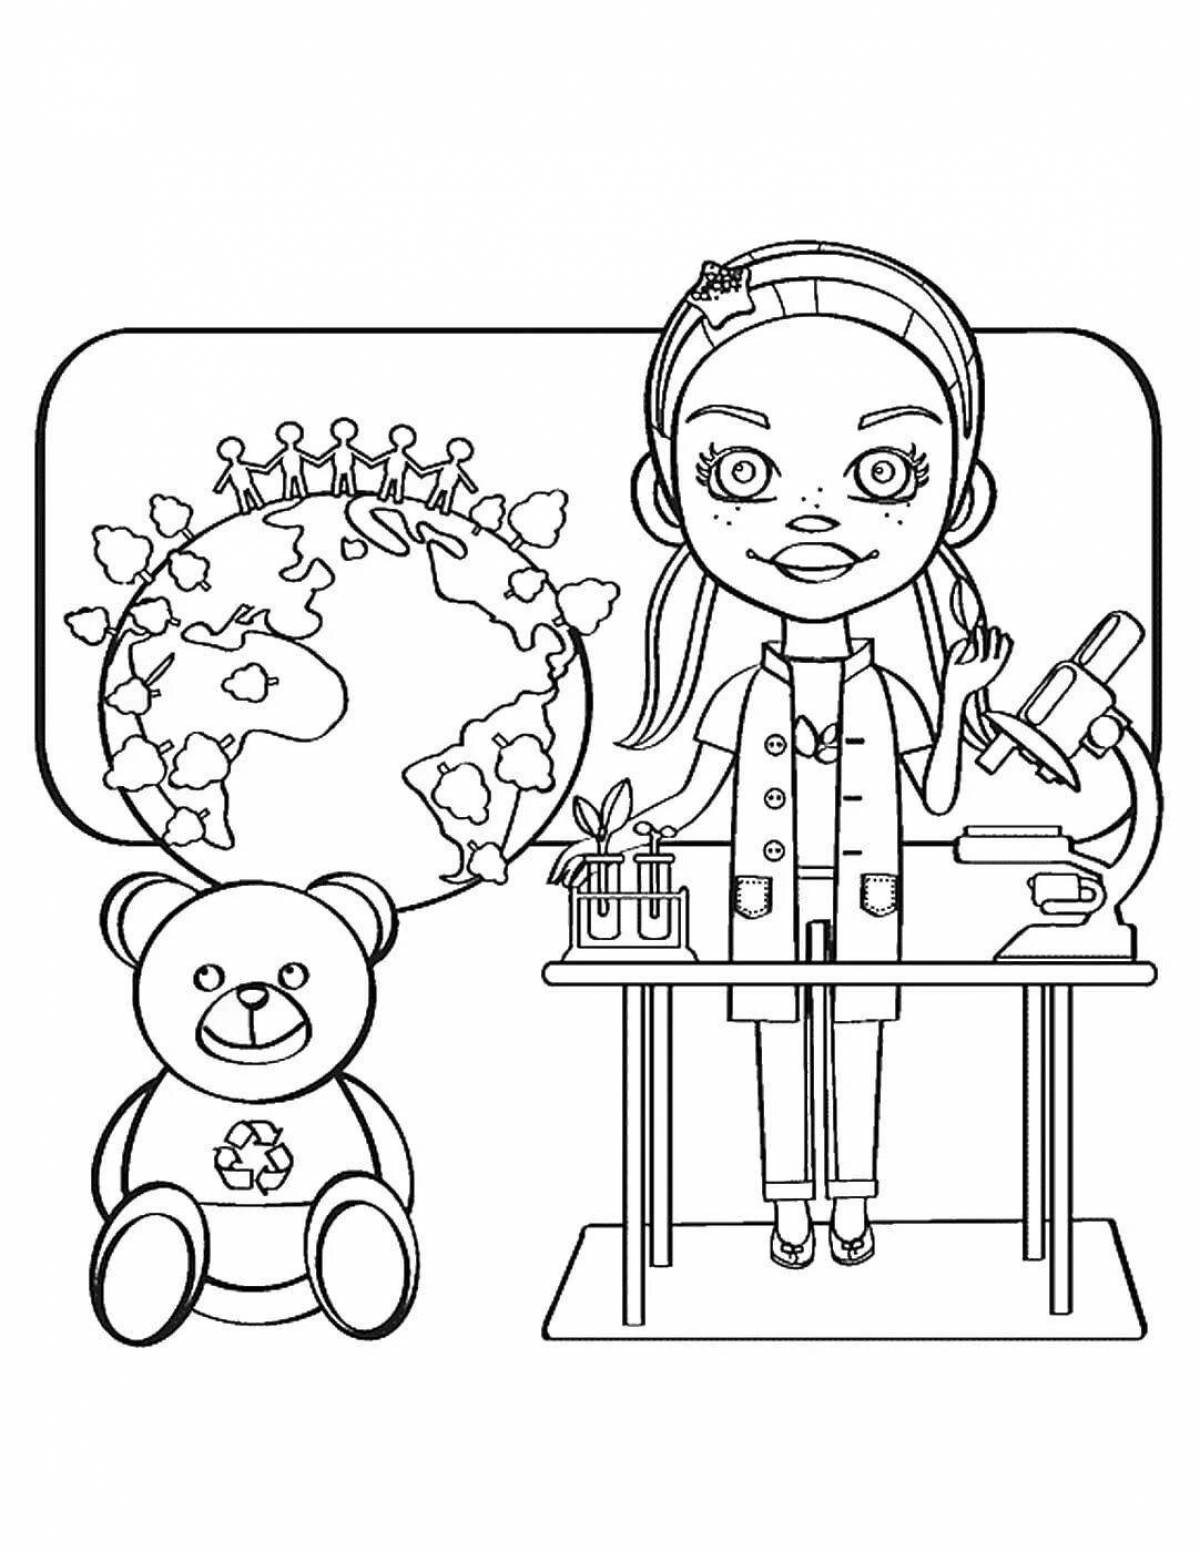 Adorable science coloring book for kids